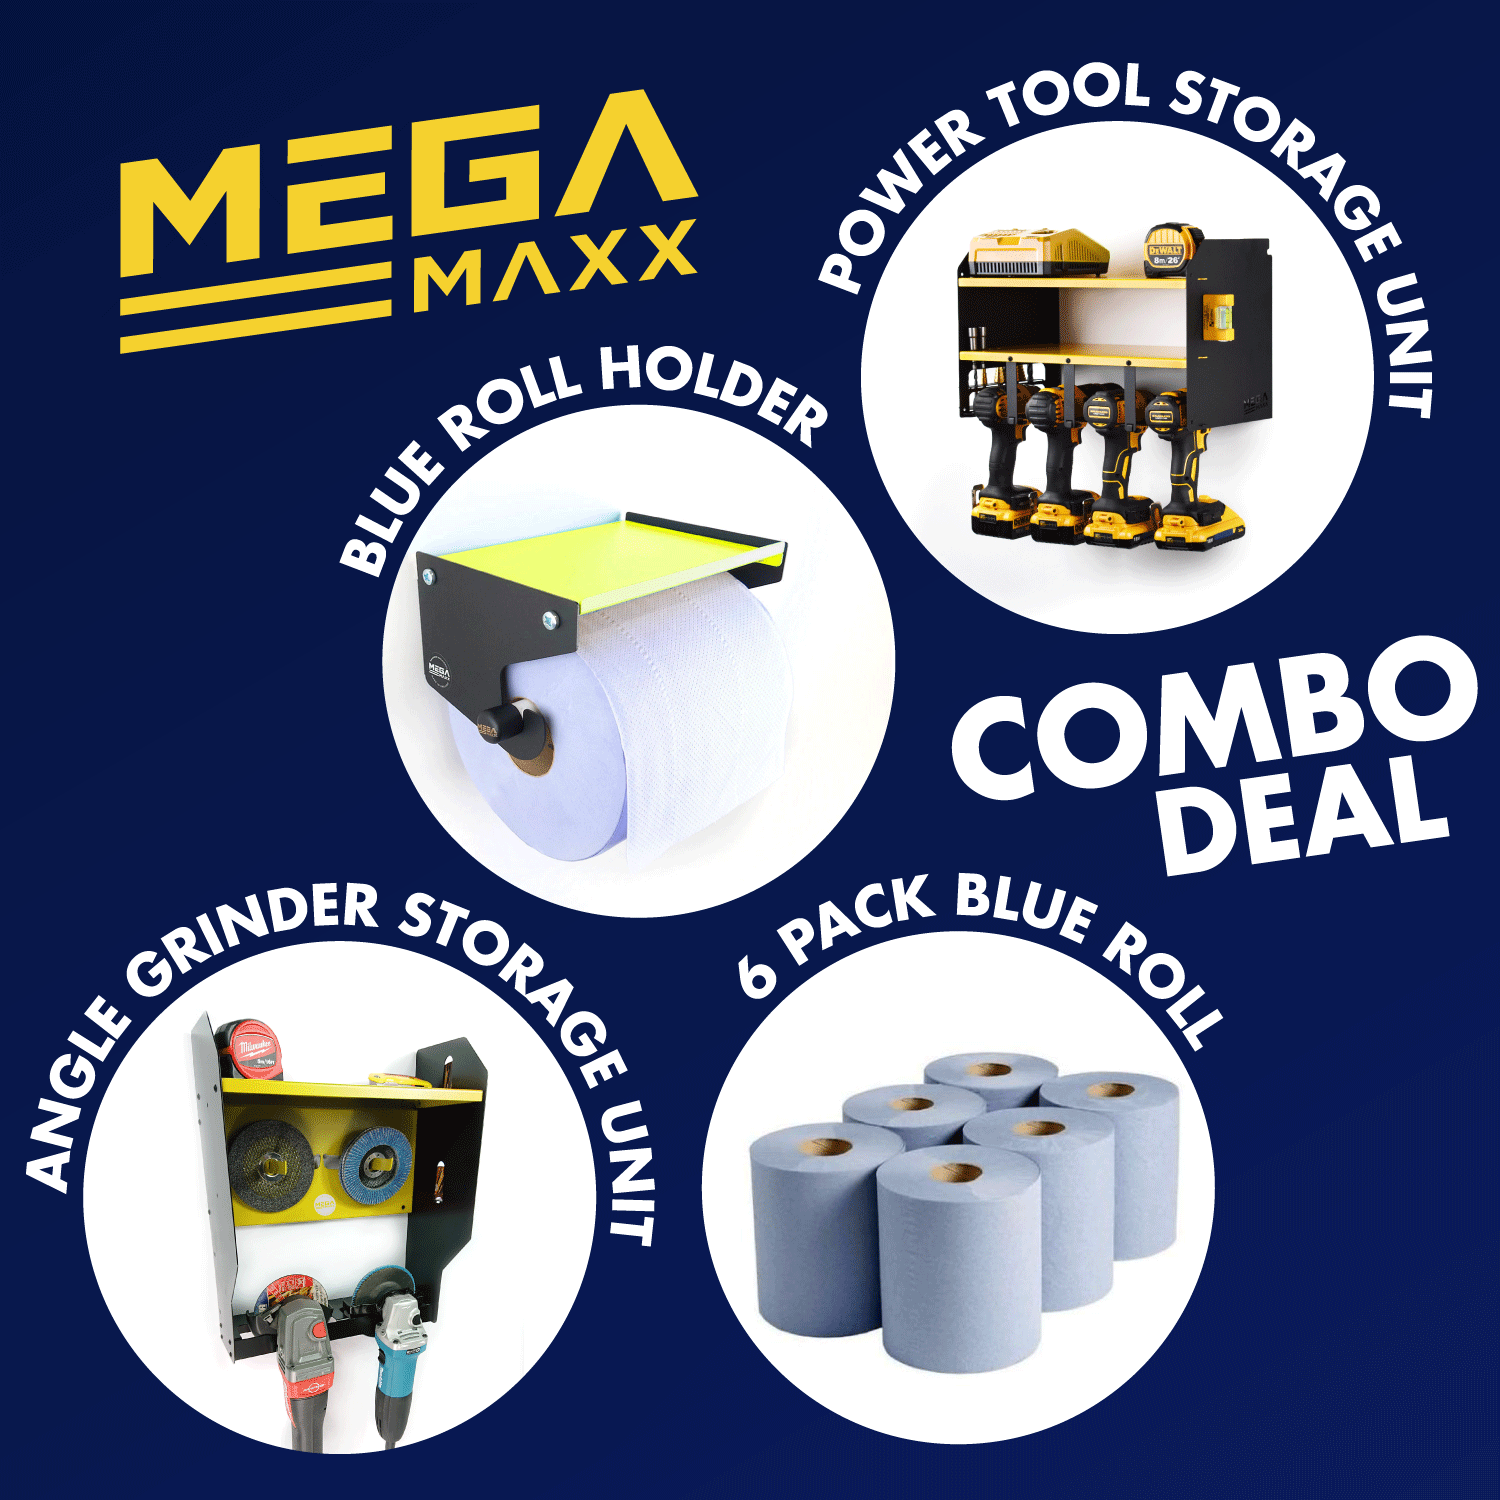 MegaMaxx UK™ Combo Deal - Power Tool Storage Unit + Angle Grinder Storage Unit + Blue Roll Holder + Pack of 6 Blue Roll